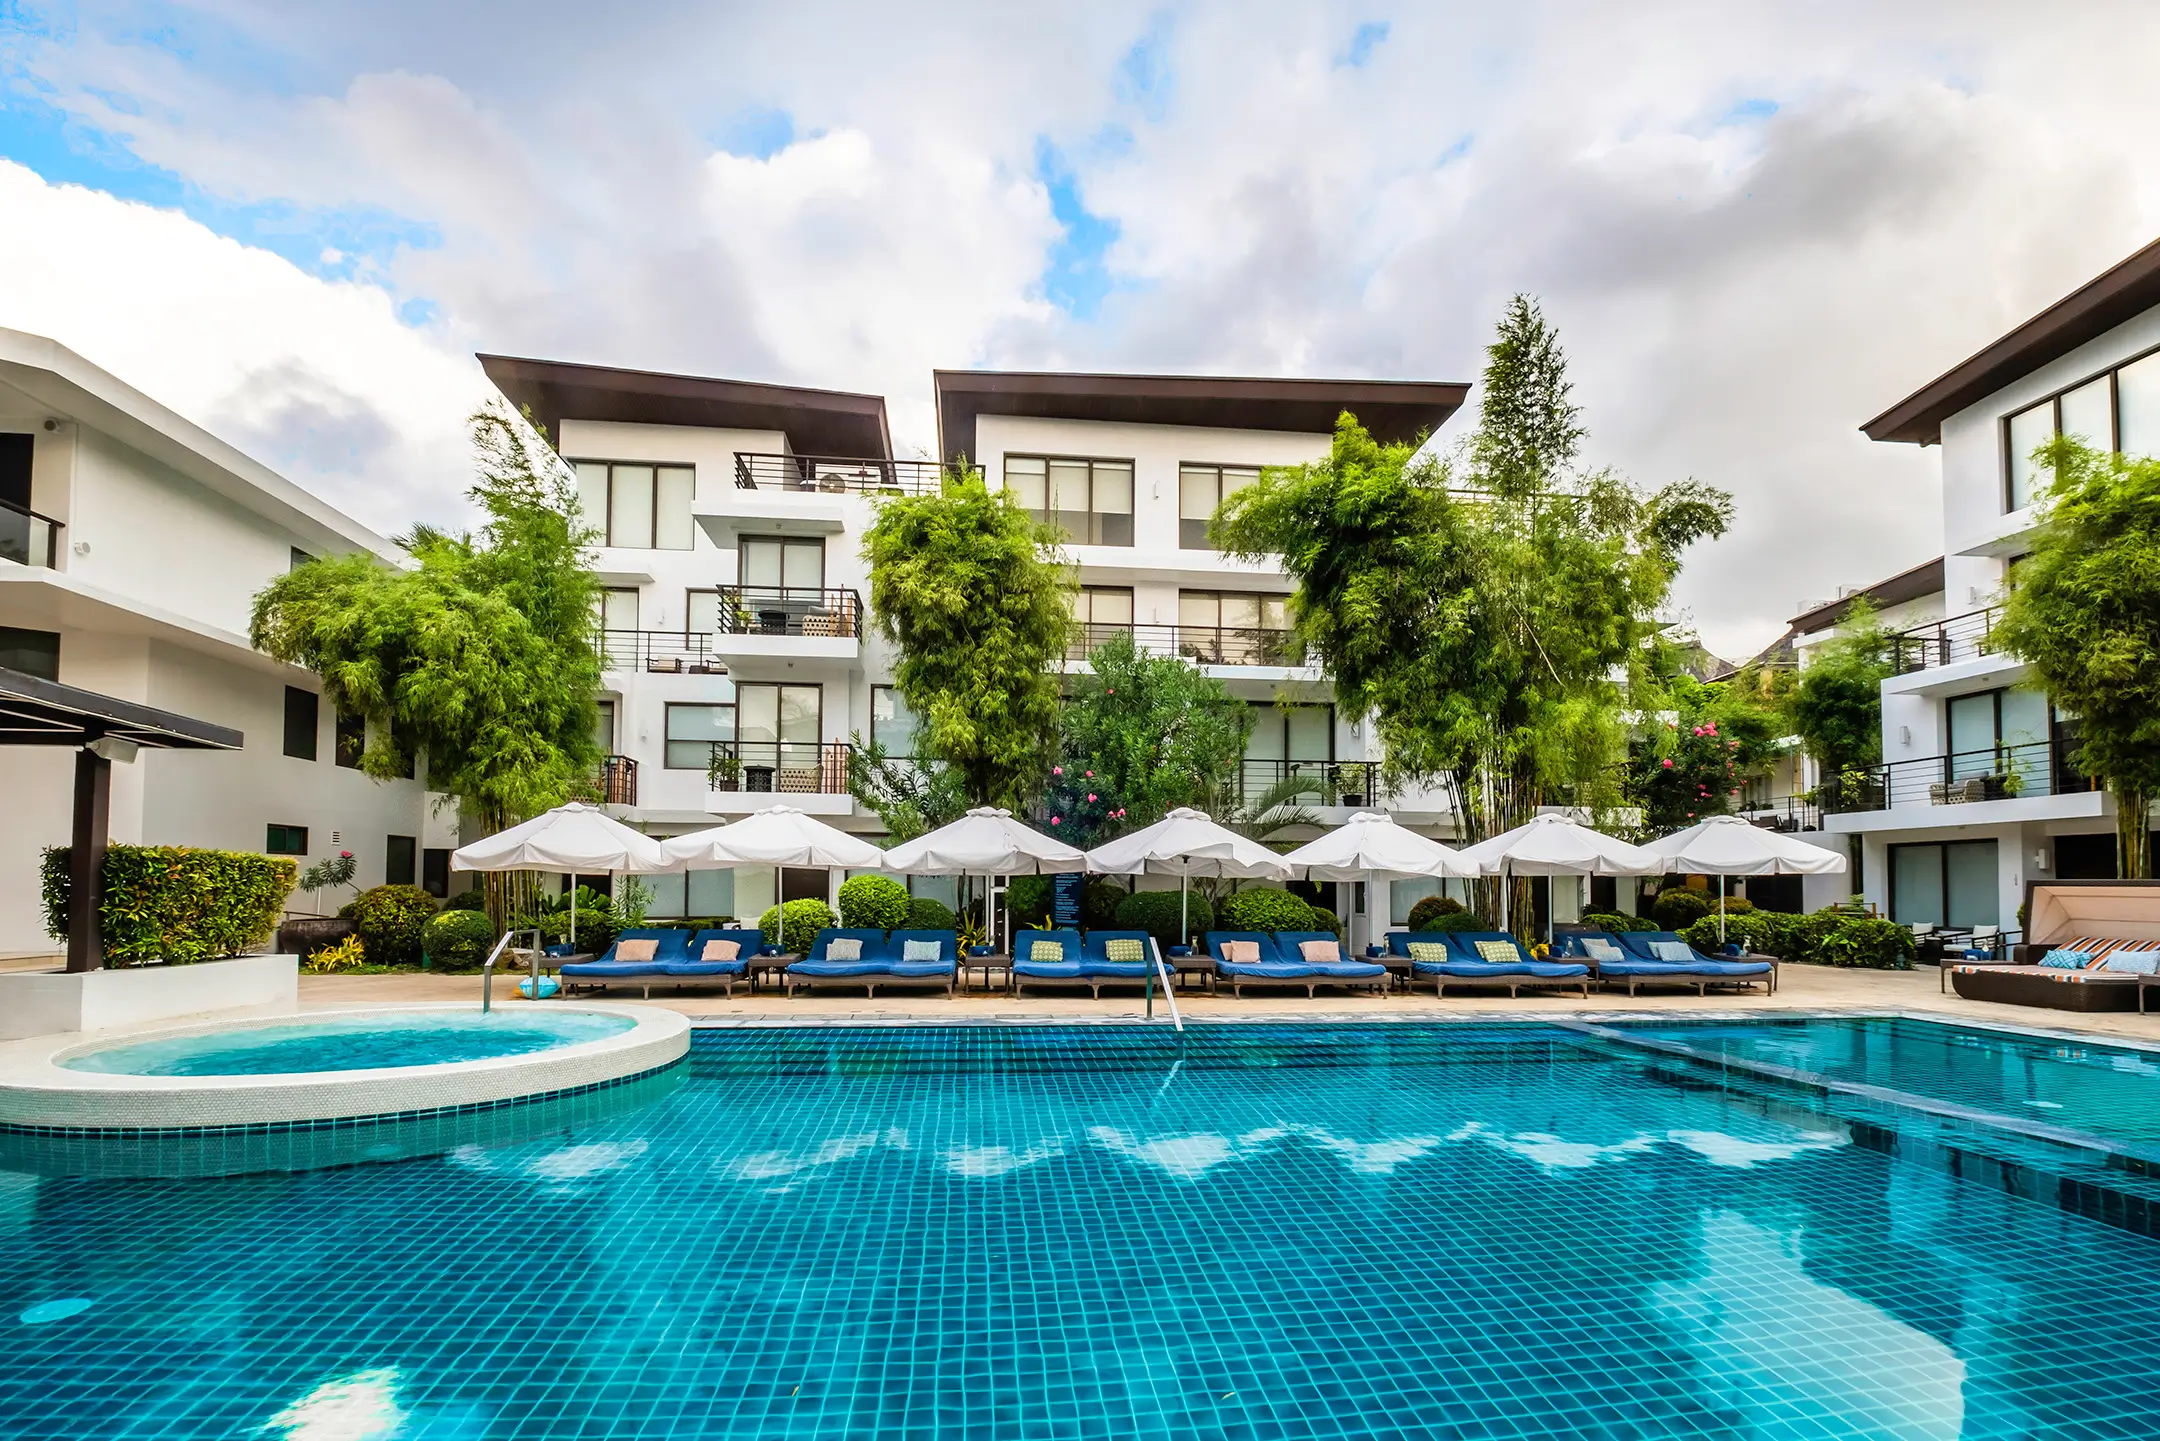 A spacious swimming pool surrounded by white sun umbrellas and lounge chairs at Discovery Shores Boracay, one of the best boutique resorts in Boracay